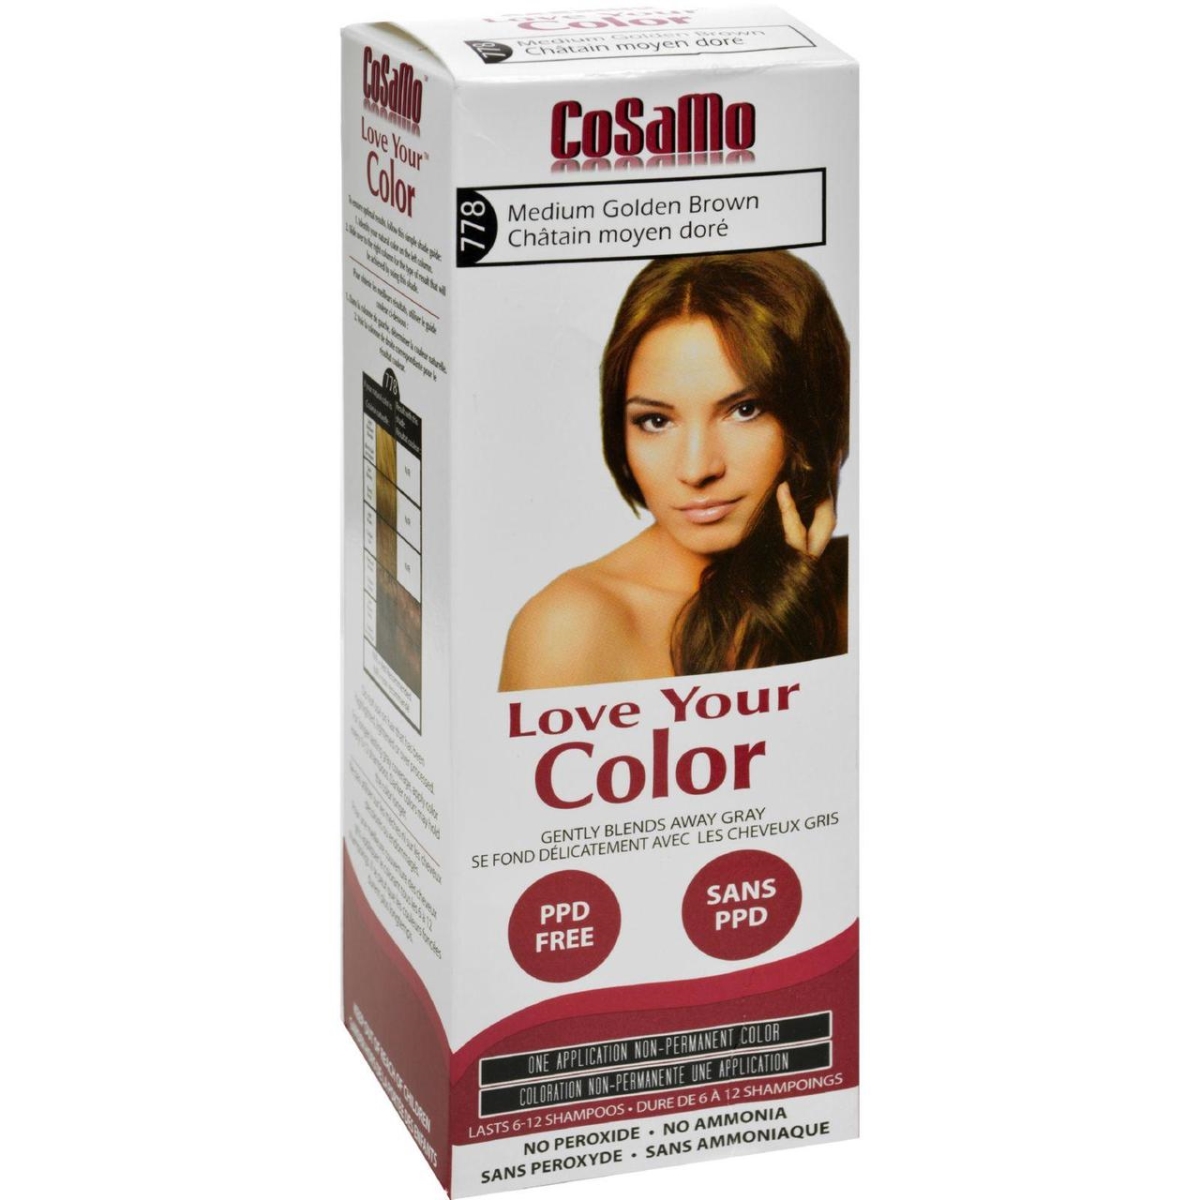 Hg1578087 Hair Color Cosamo Non Permanent, Med Gold Brown - 1 Count